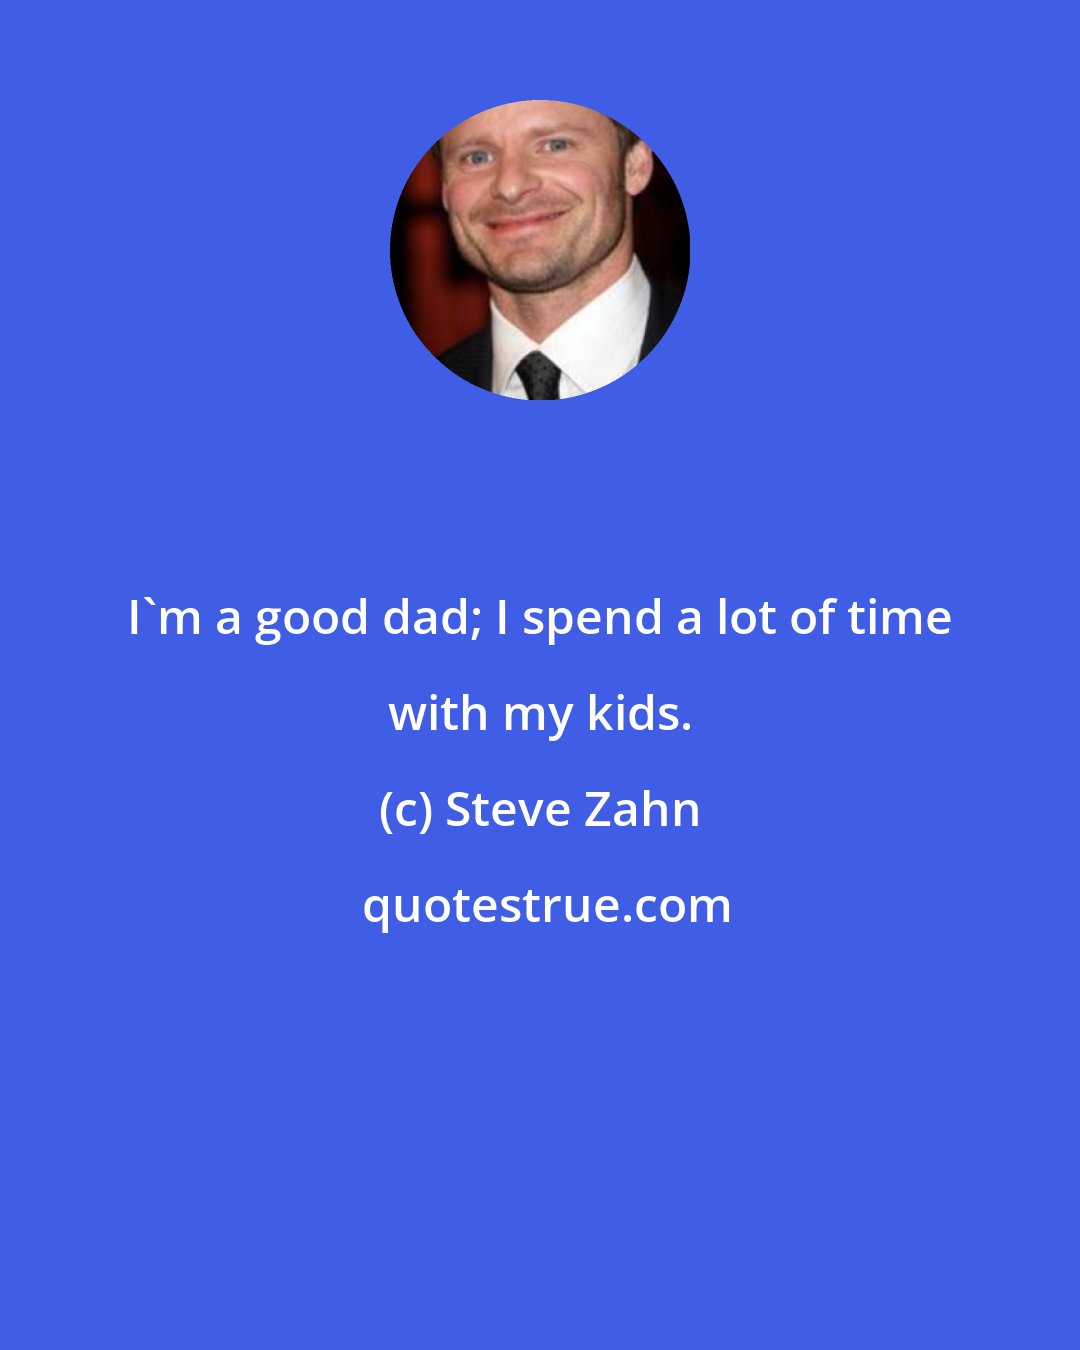 Steve Zahn: I'm a good dad; I spend a lot of time with my kids.